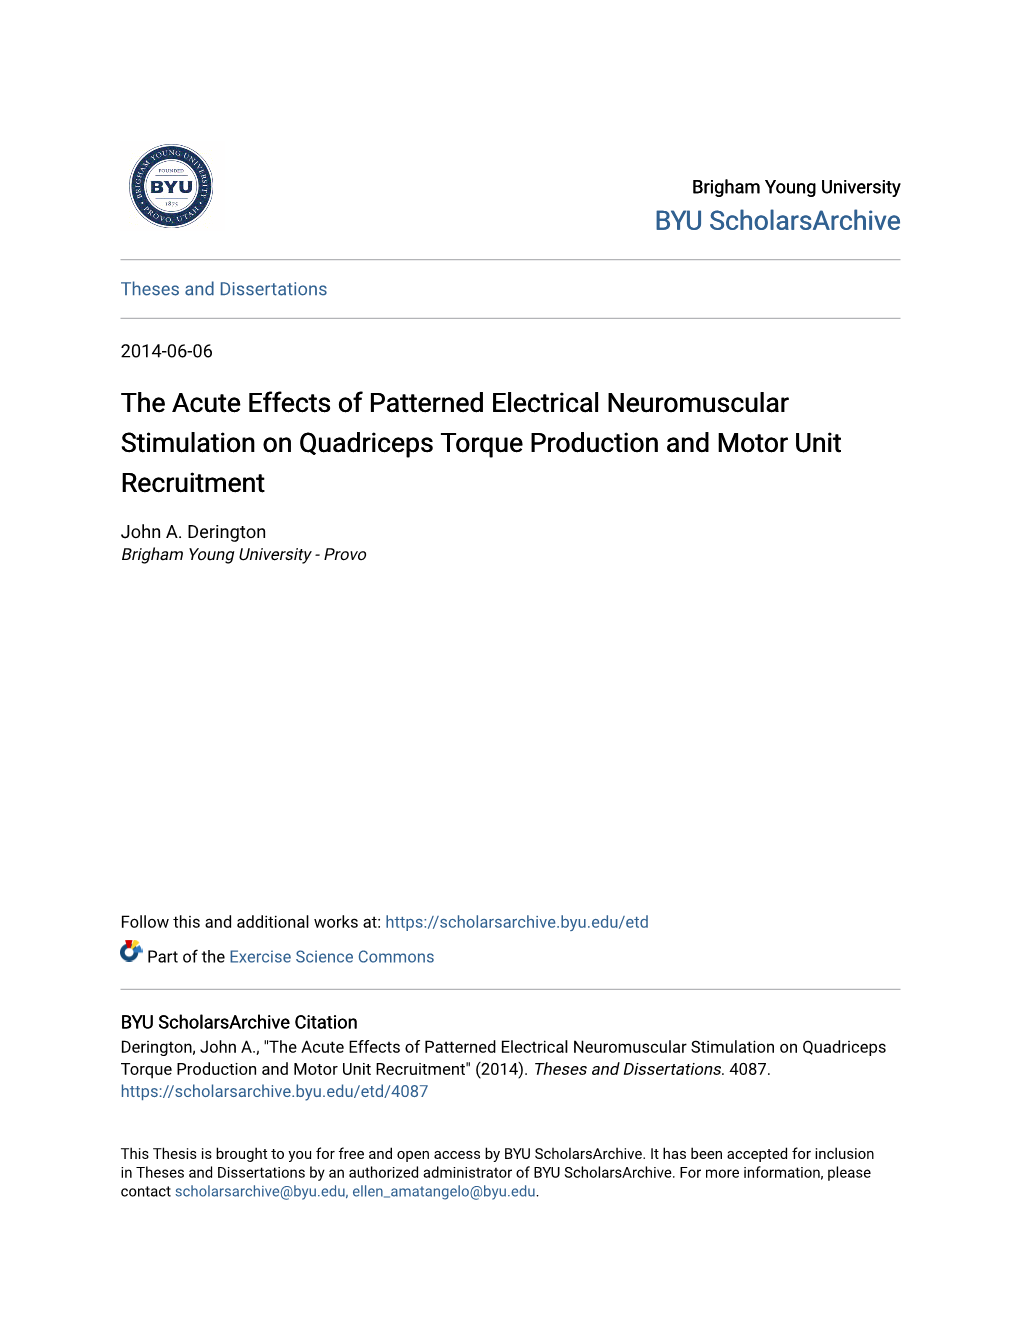 The Acute Effects of Patterned Electrical Neuromuscular Stimulation on Quadriceps Torque Production and Motor Unit Recruitment